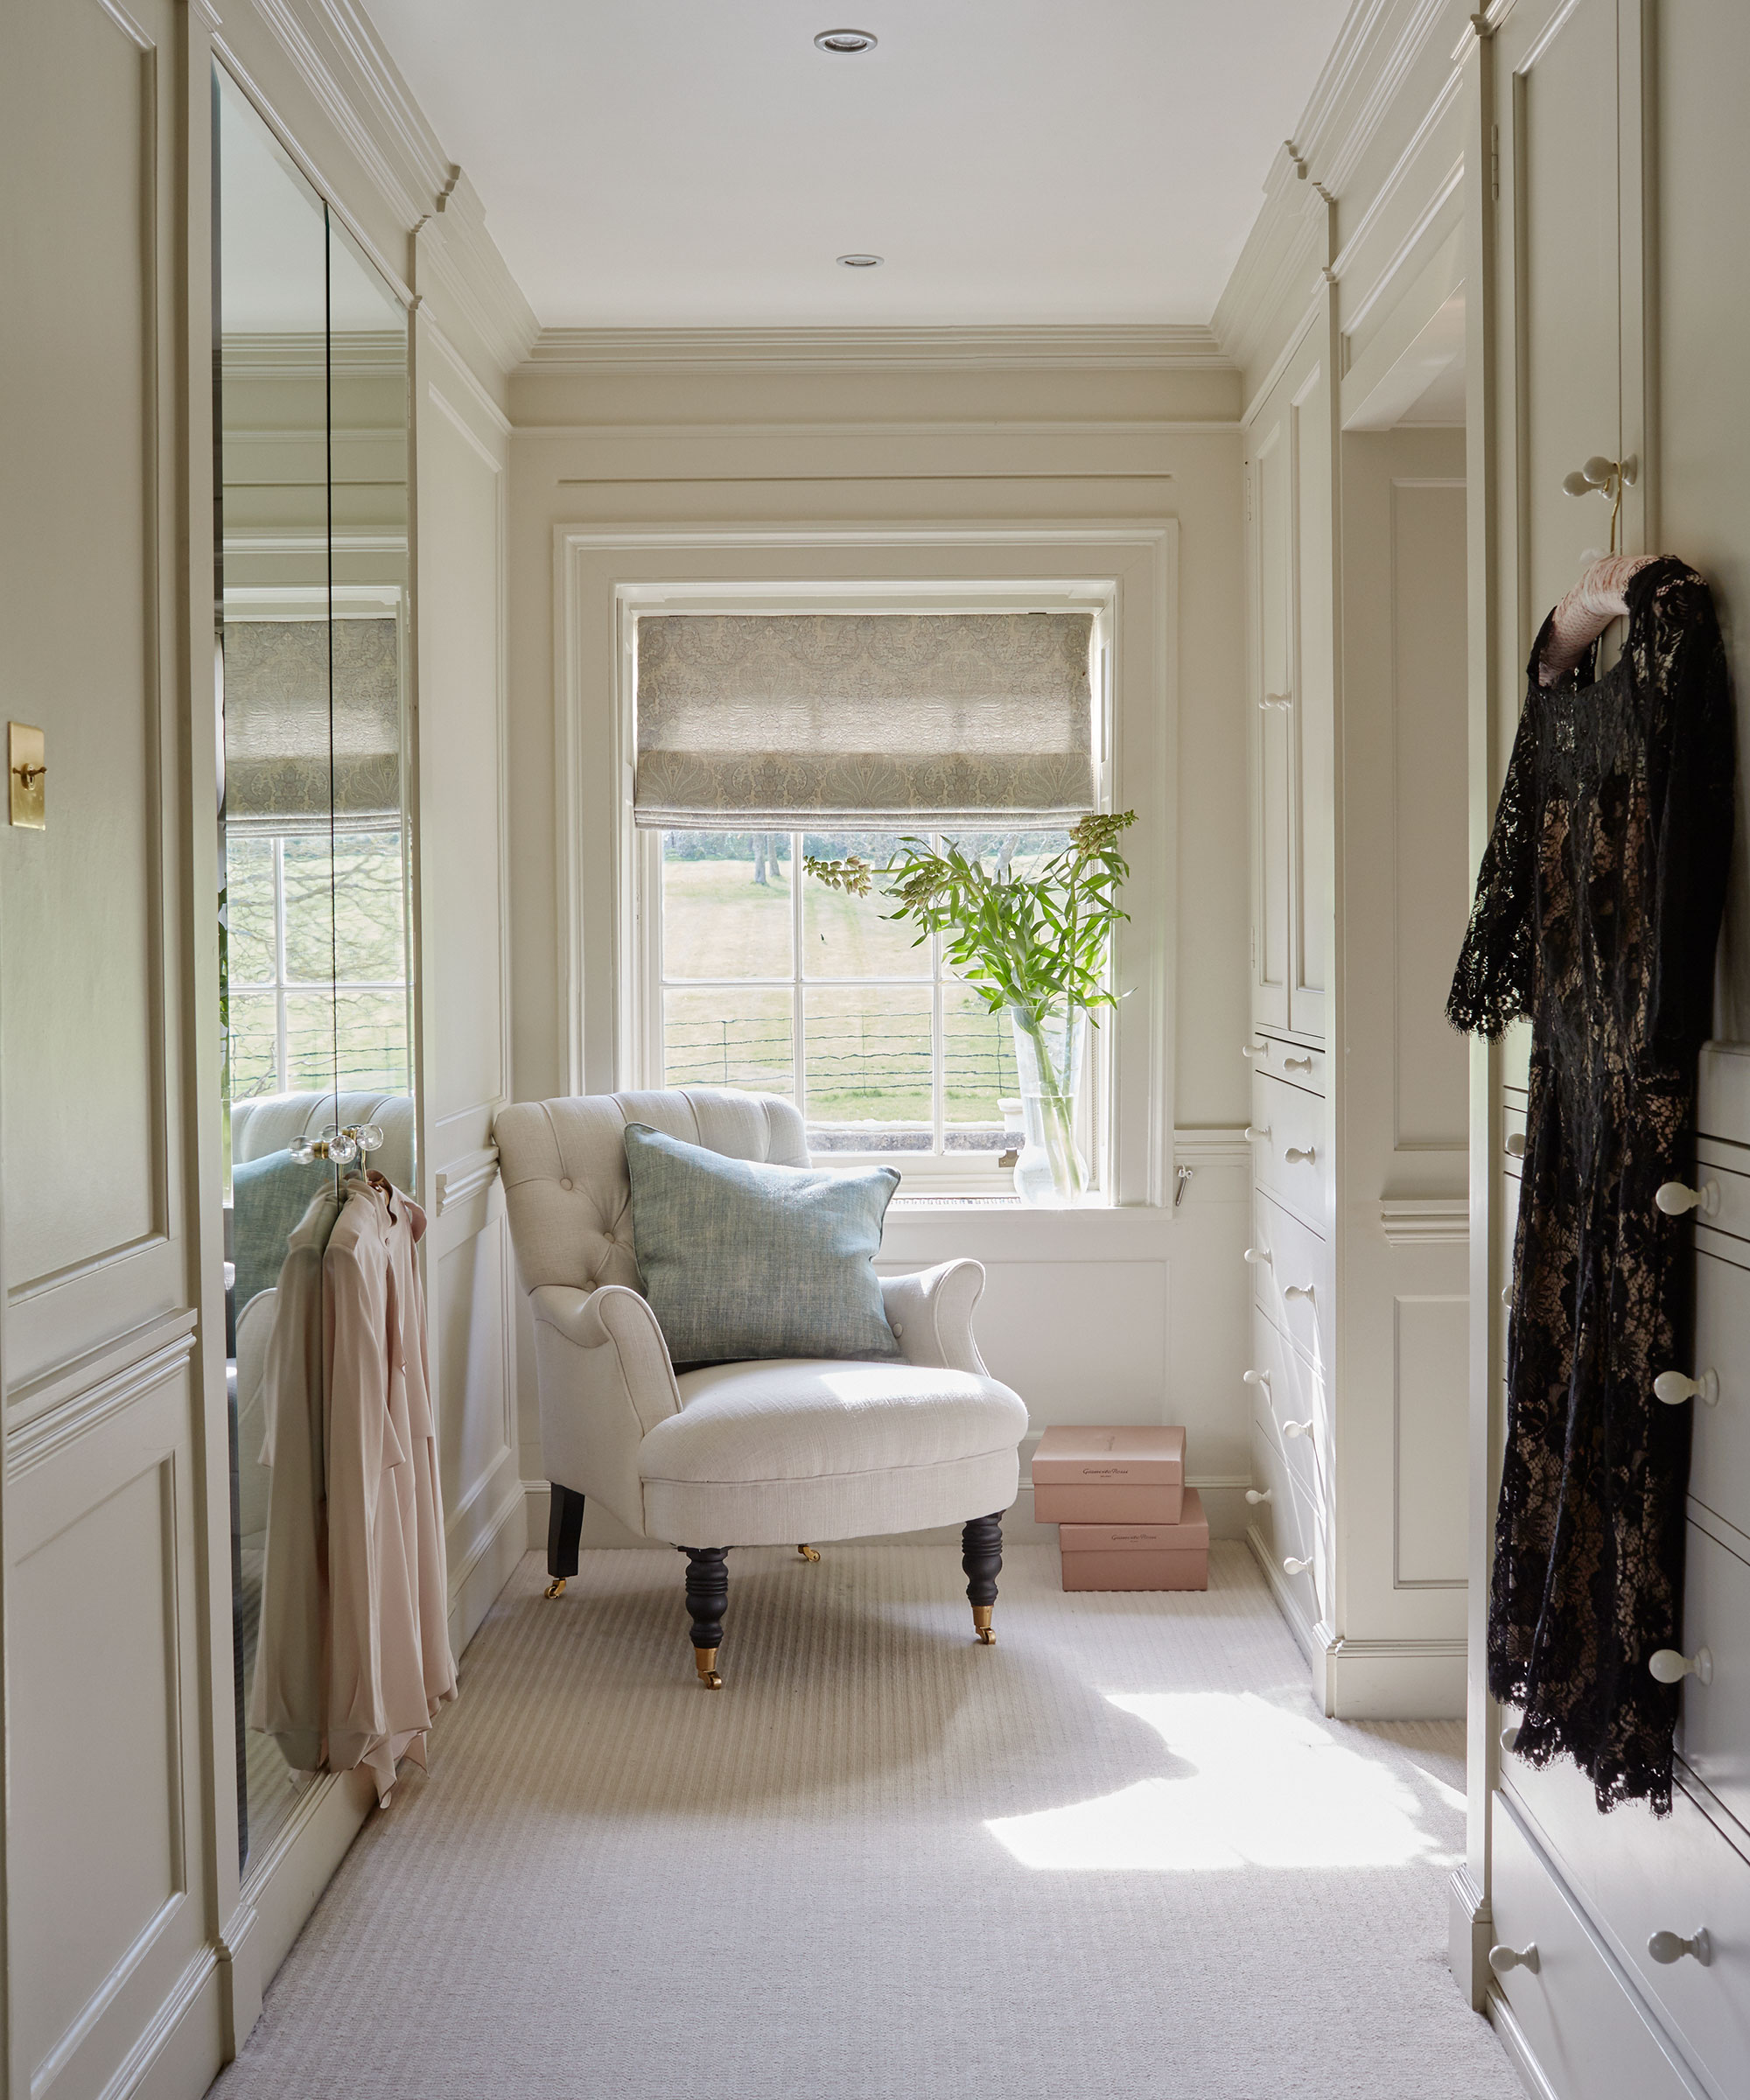 Walk-in wardrobe ideas in cream and off-white, including a small armchair and a mirrored wardrobe.